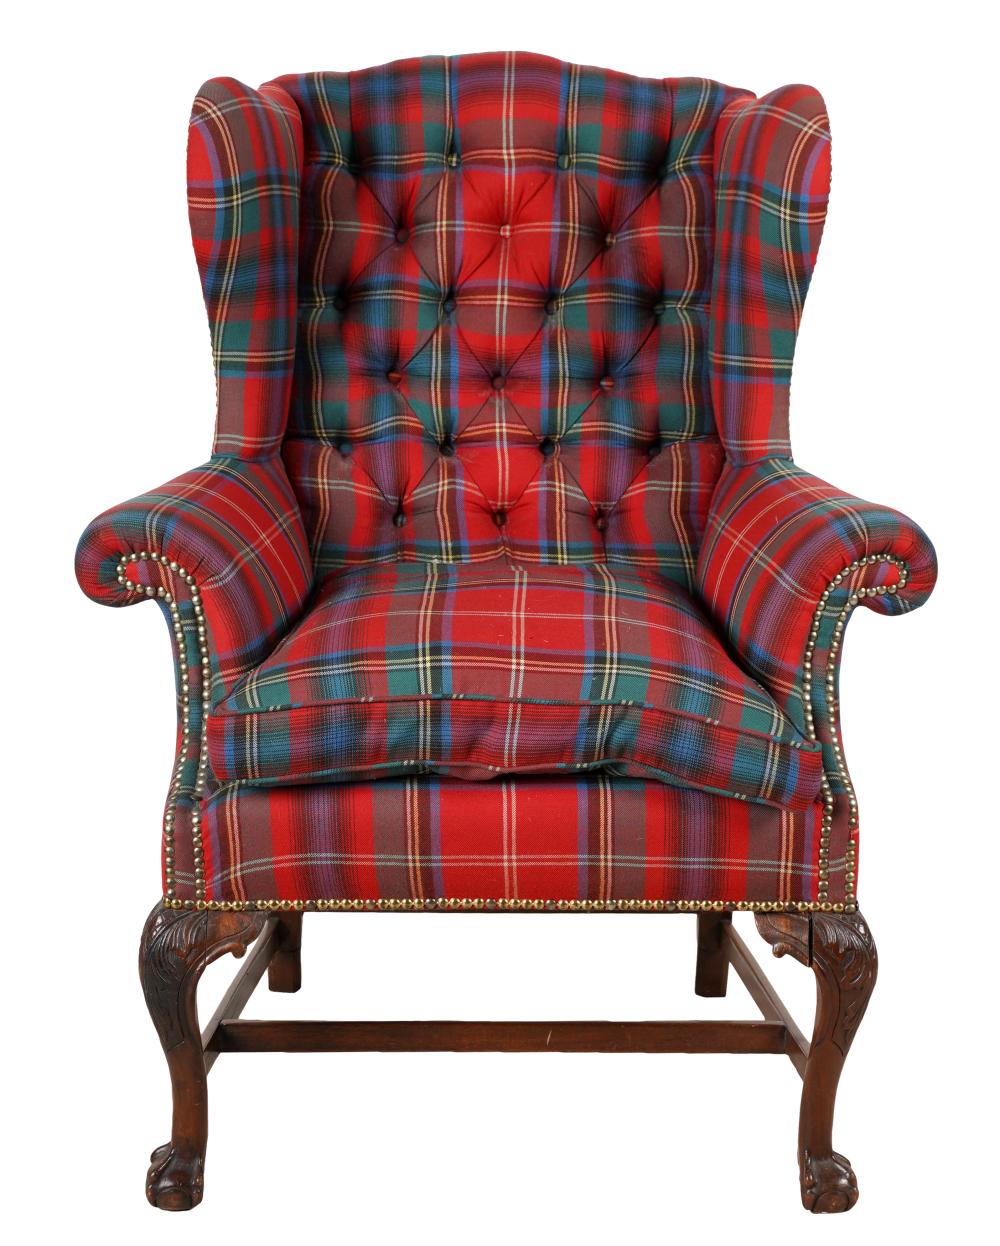 CHIPPENDALE-STYLE WINGCHAIRcovered